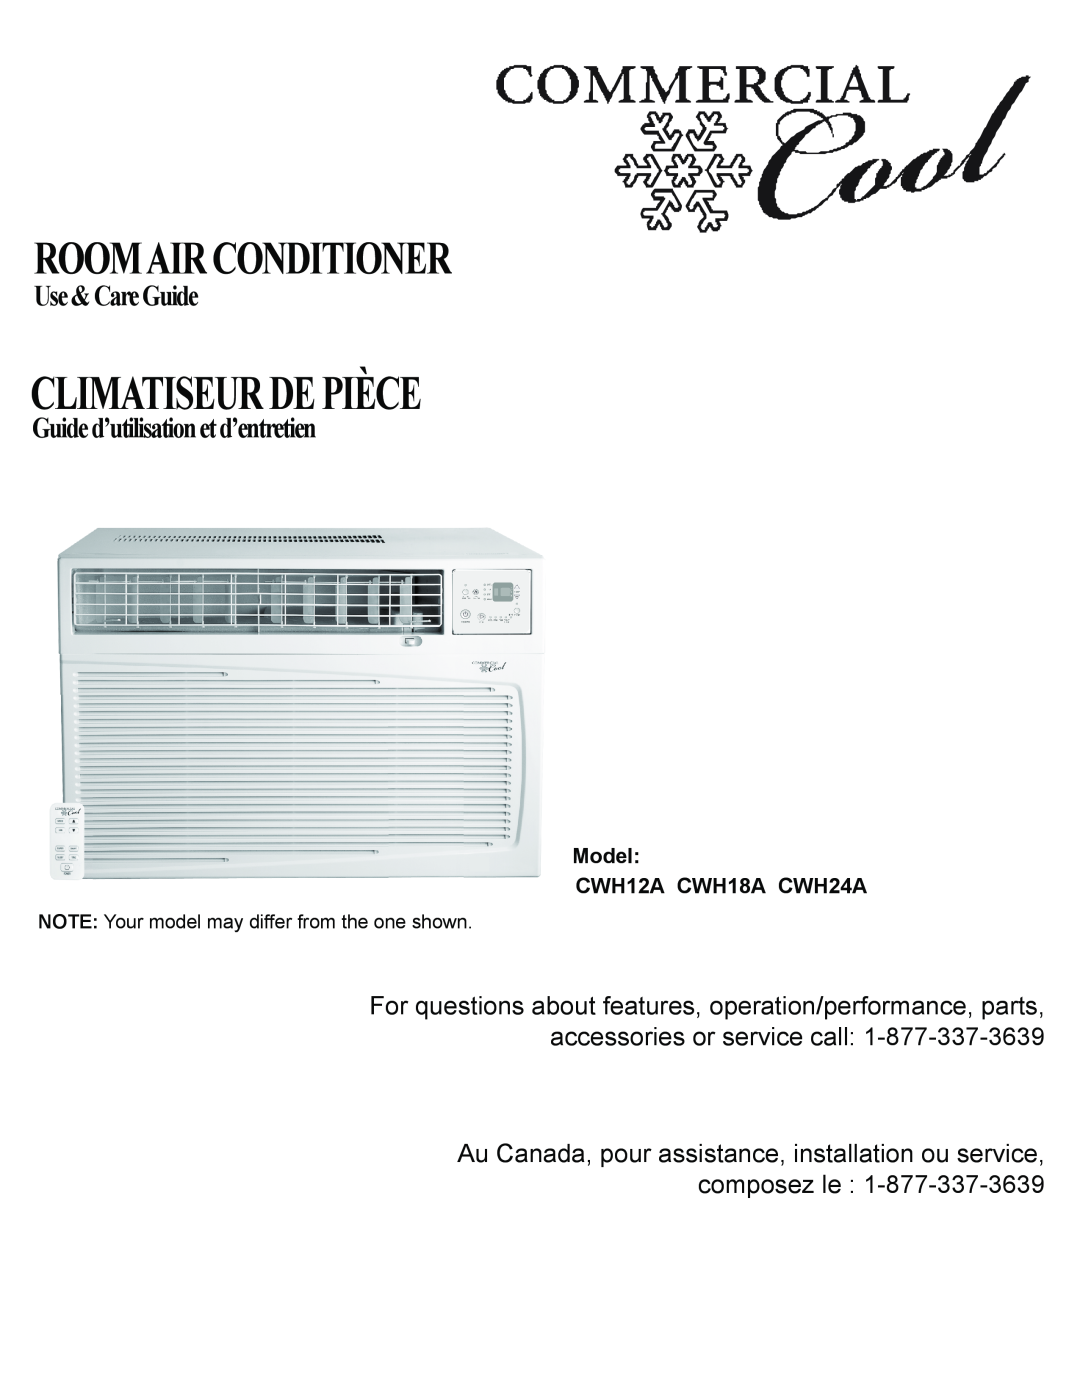 Haier CWH18A, CWH12A, CWH24A manual Climatiseurdepièce, Roomairconditioner, Use&CareGuide, Guided’utilisationetd’entretien 